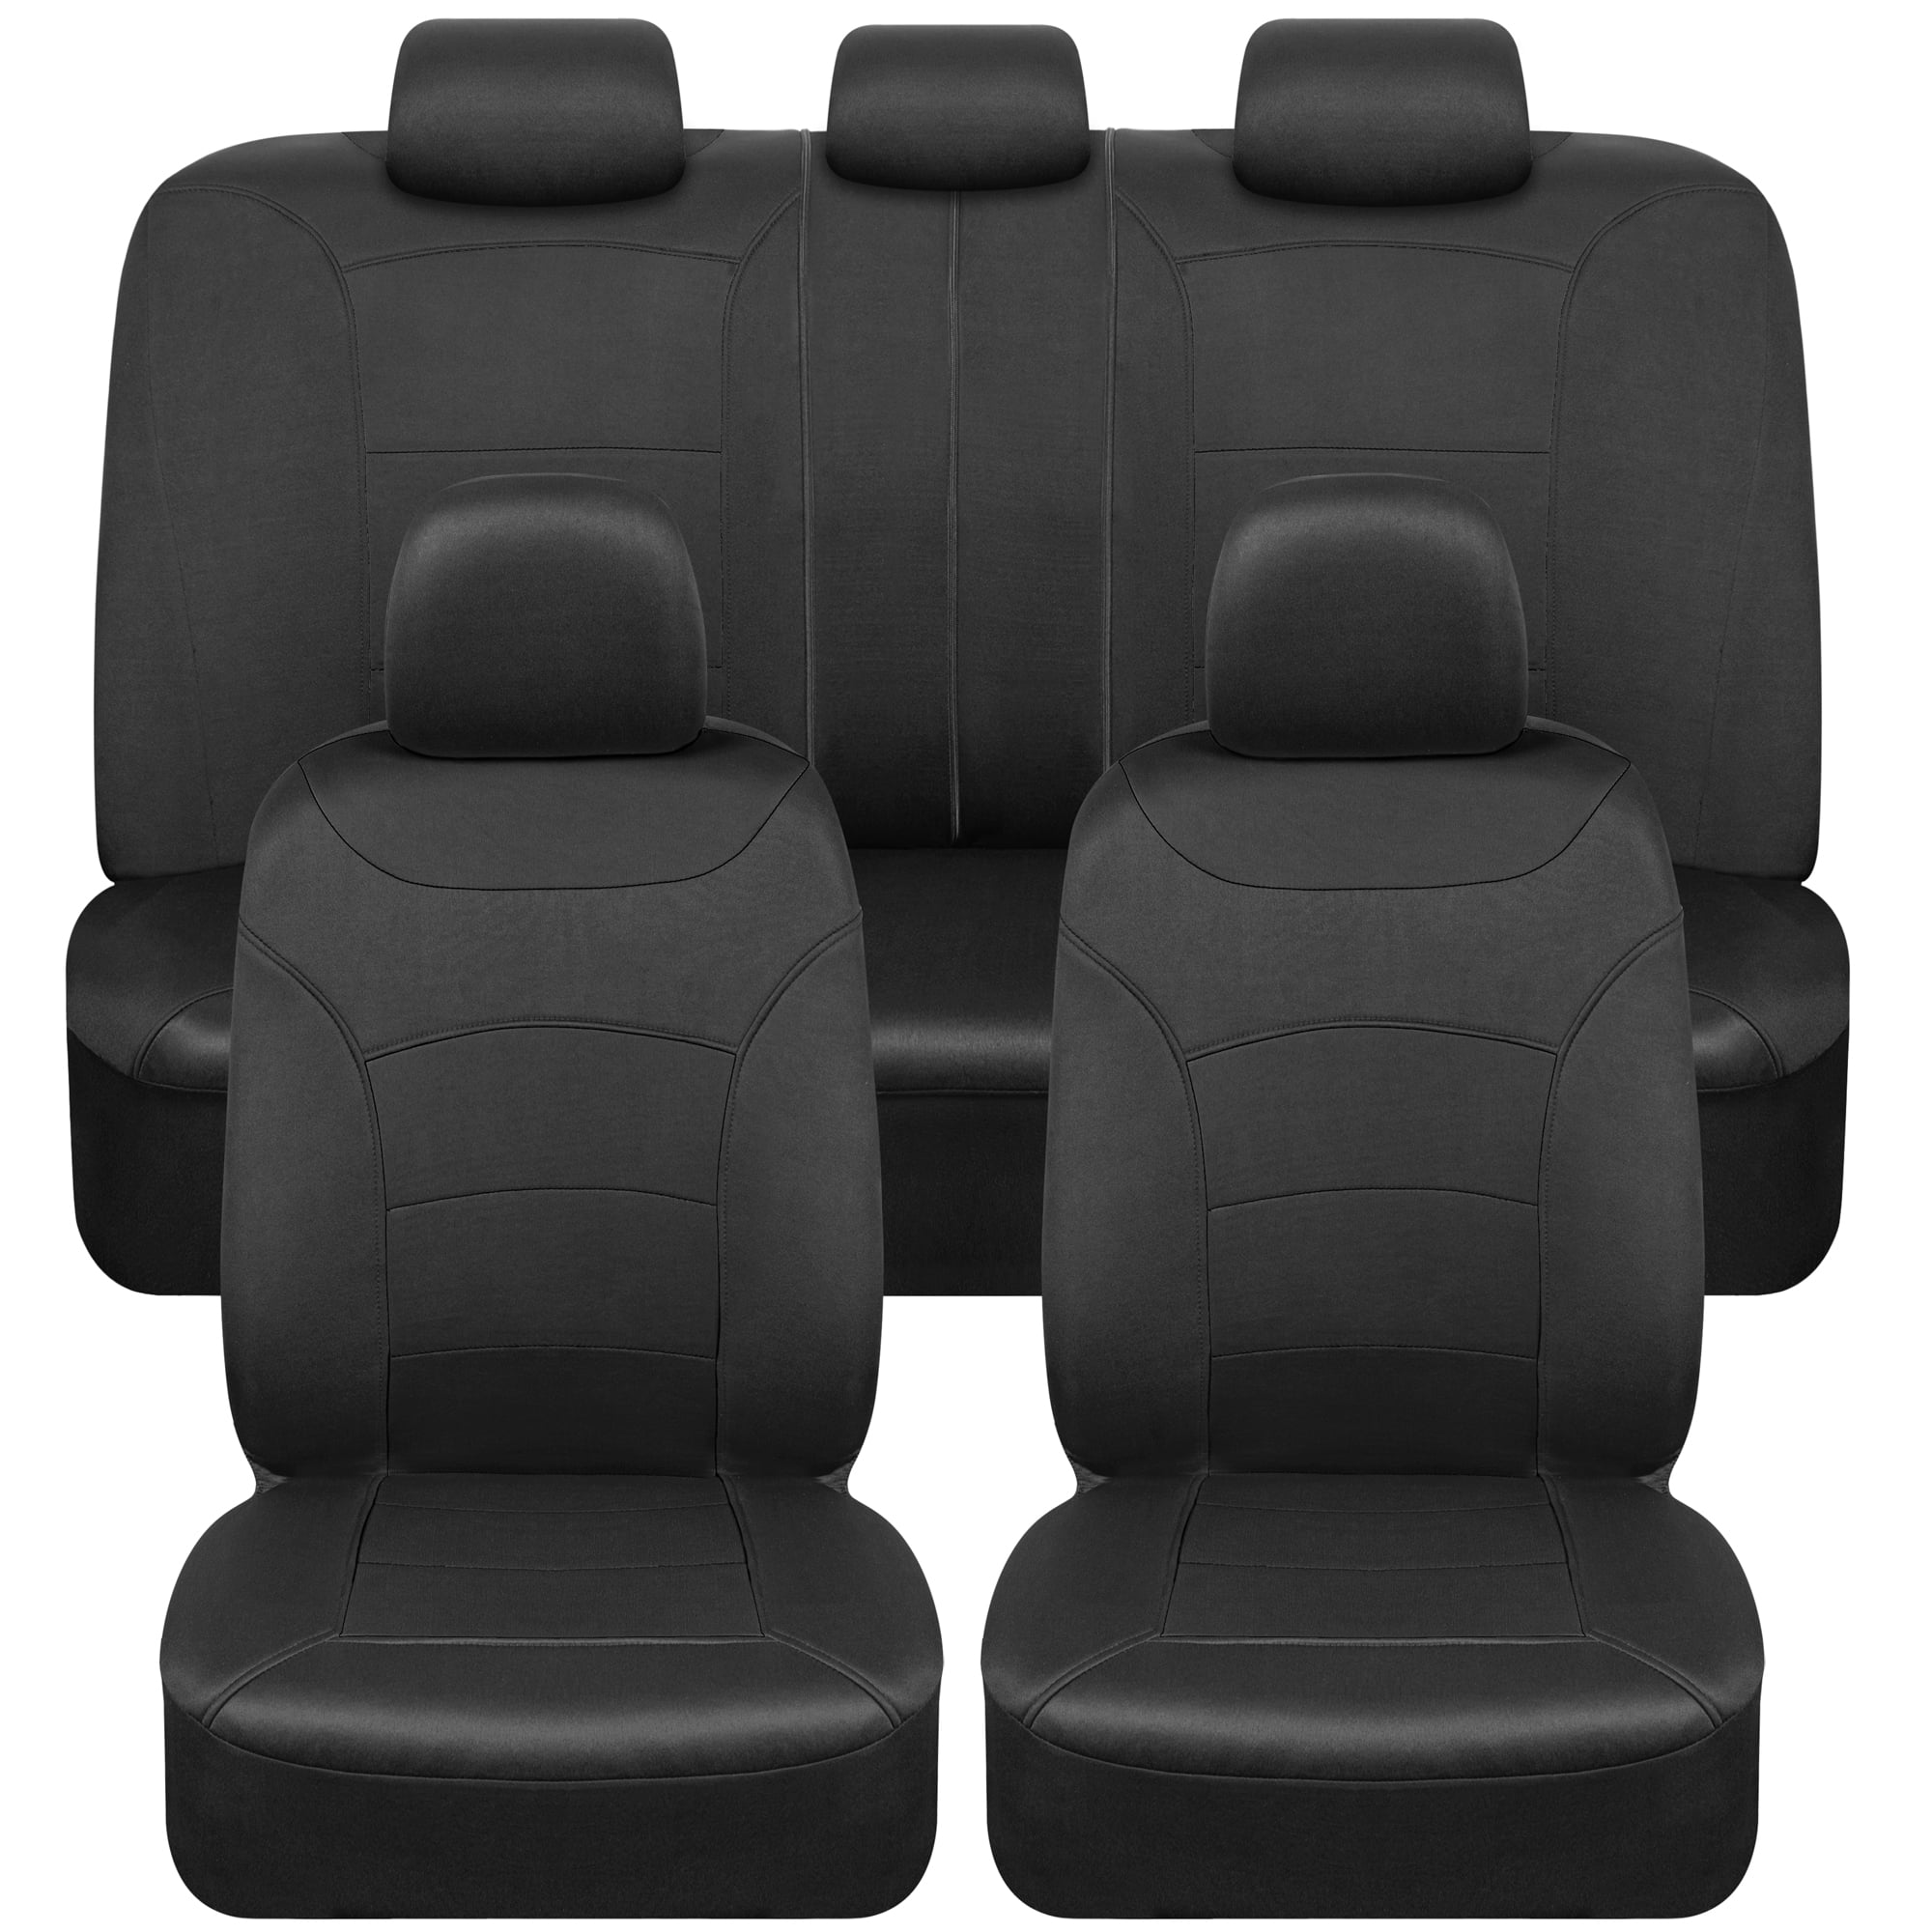 Plush Seat Covers For Cars - Universal Front Of Car Seat Cushions,front And  Rear Split Bench Car Seat Cover Interior Covers For Auto Truck Van Suv